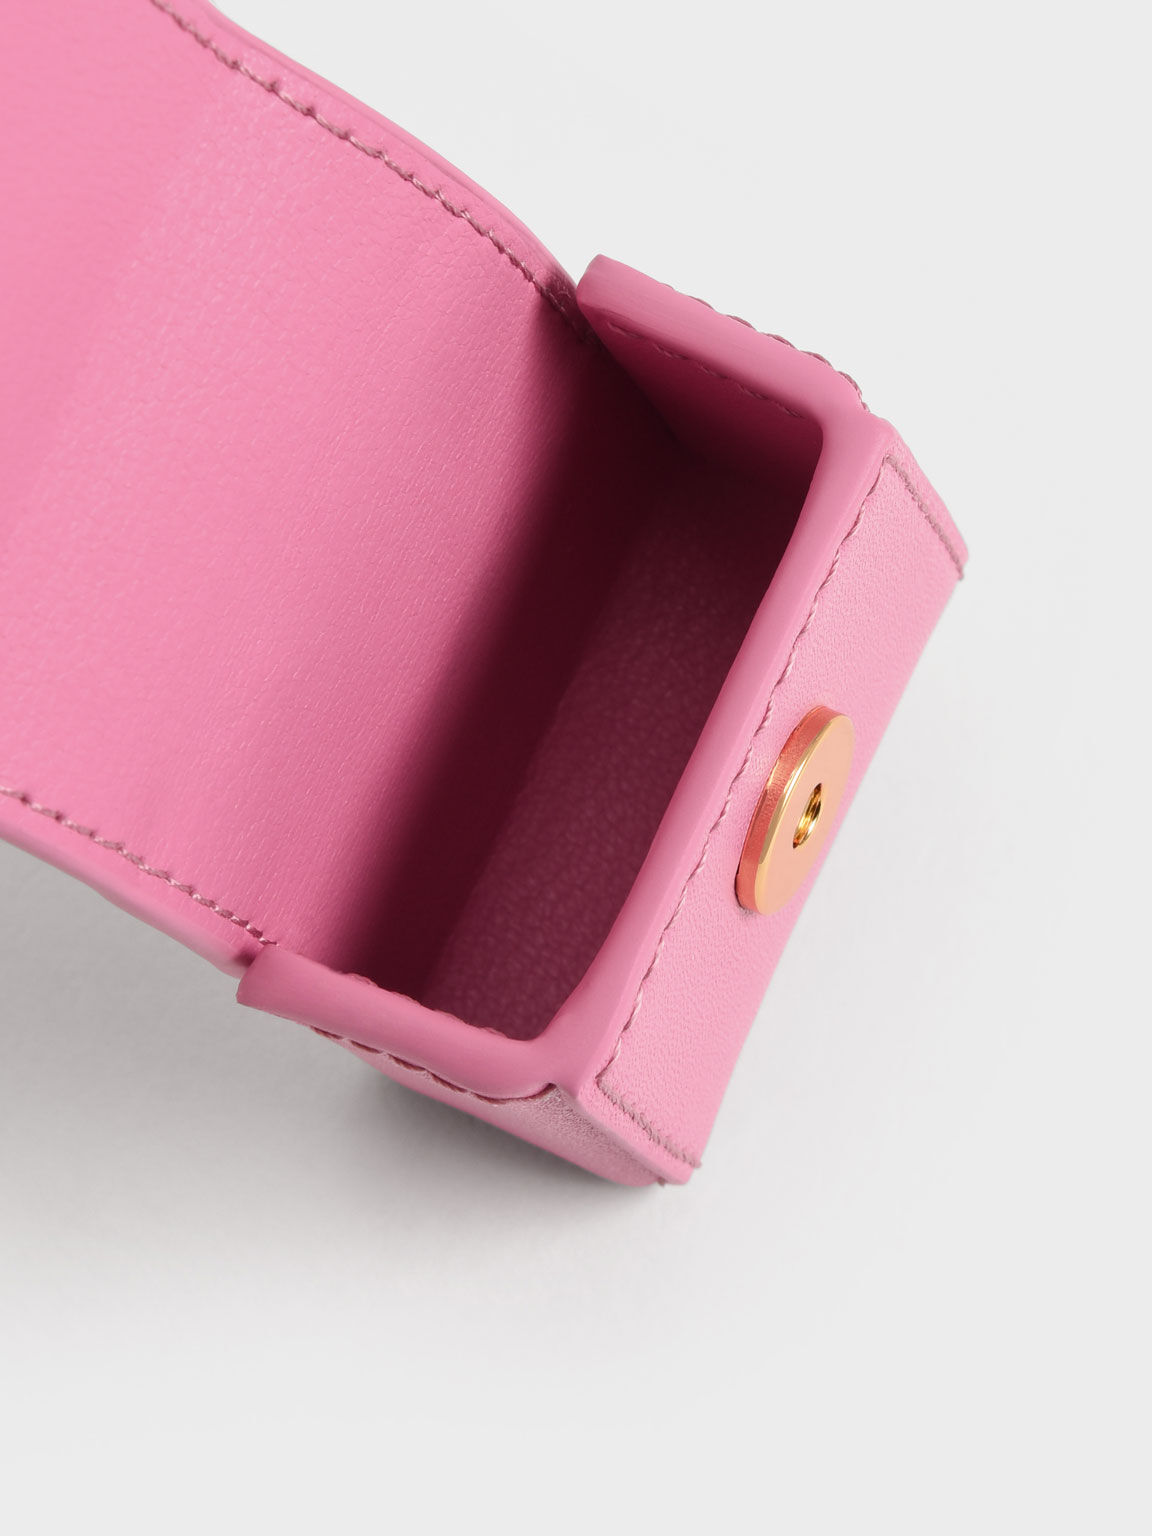 AirPods Pouch, Pink, hi-res